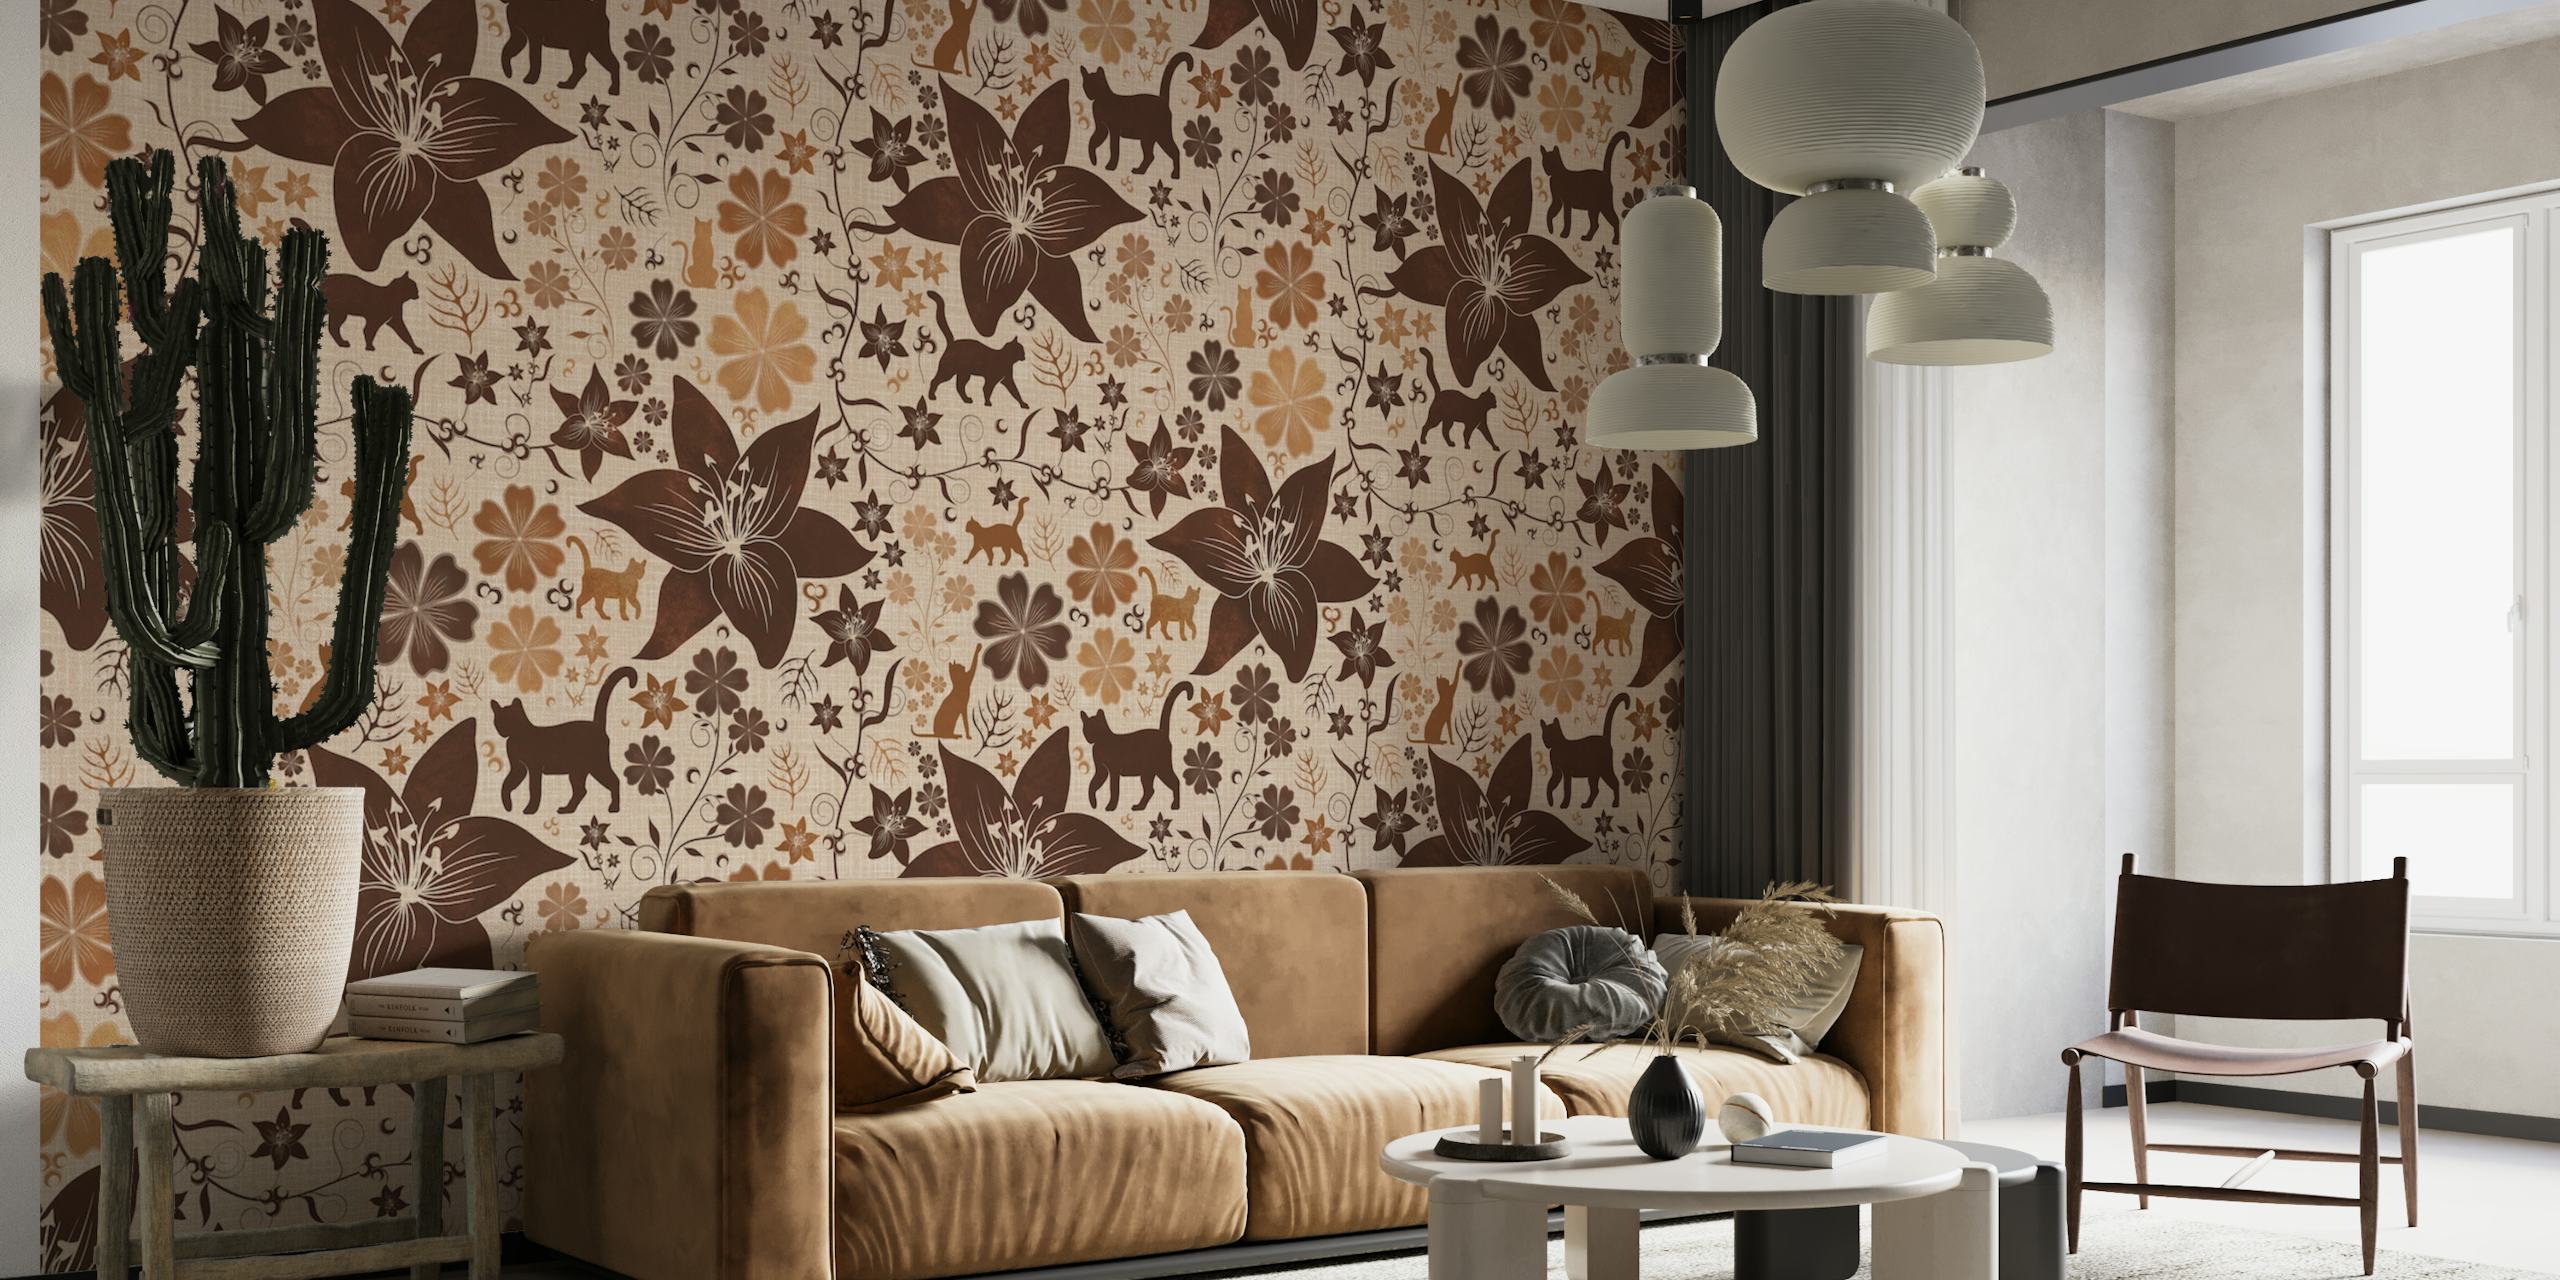 Wall mural of cats and floral patterns in earth tones